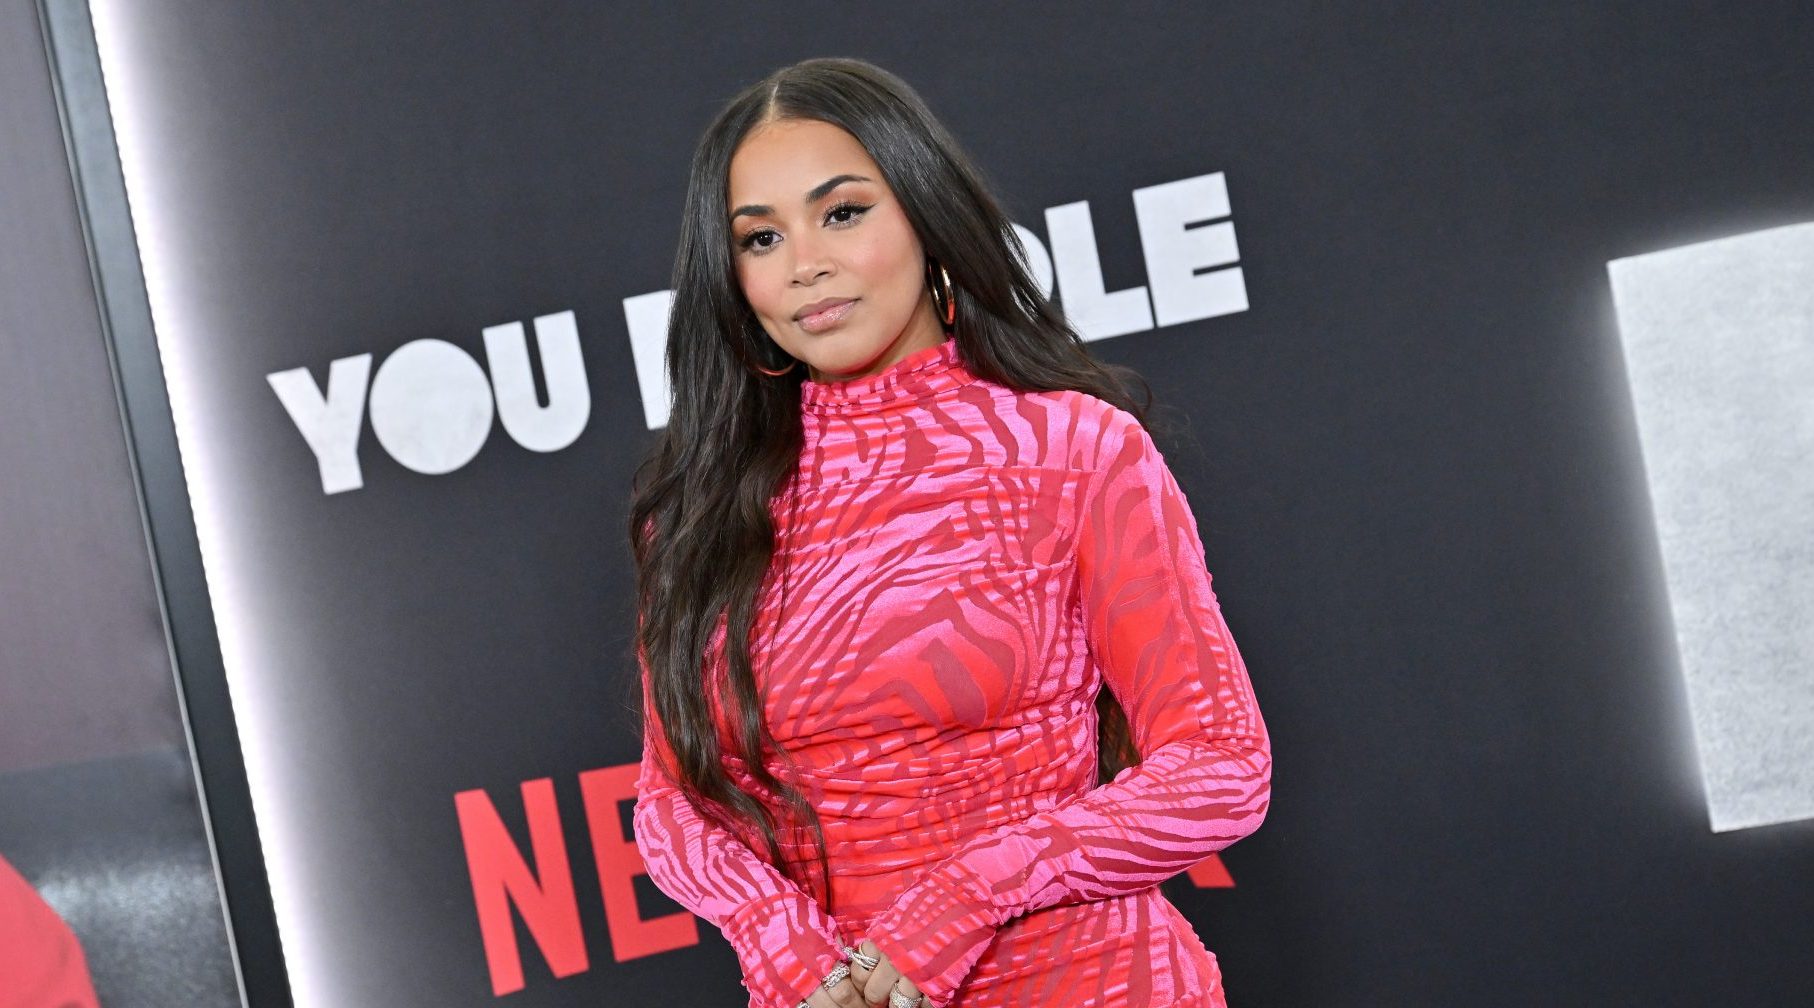 Back To WERK: Lauren London Stuns In Velvety Pink For ‘You People’ Premiere, Fans Rejoice Over Her Return To Acting